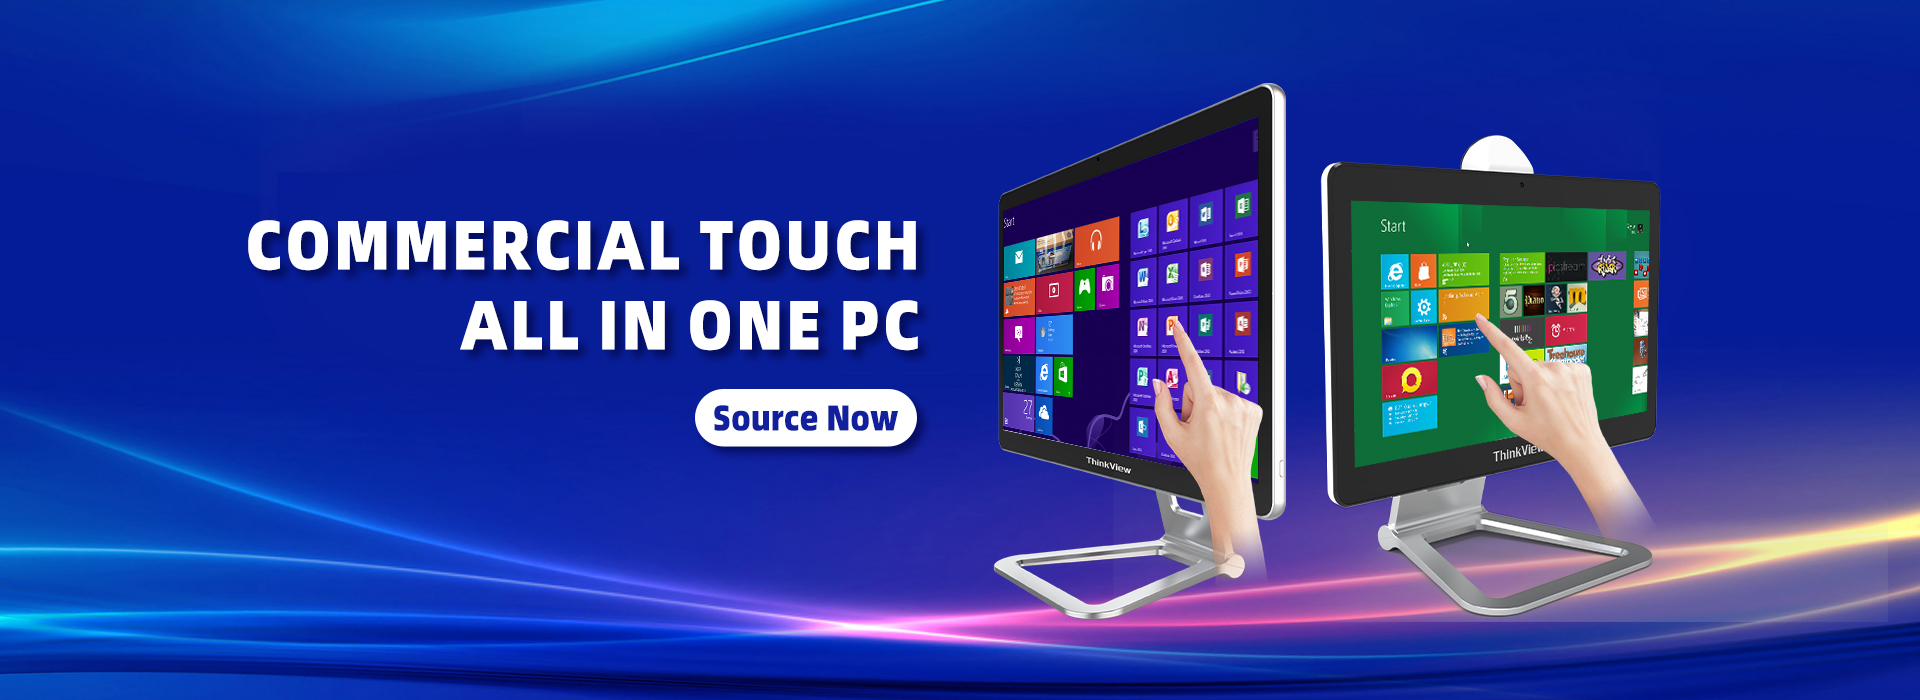 Commercial Touch All i le PC e tasi